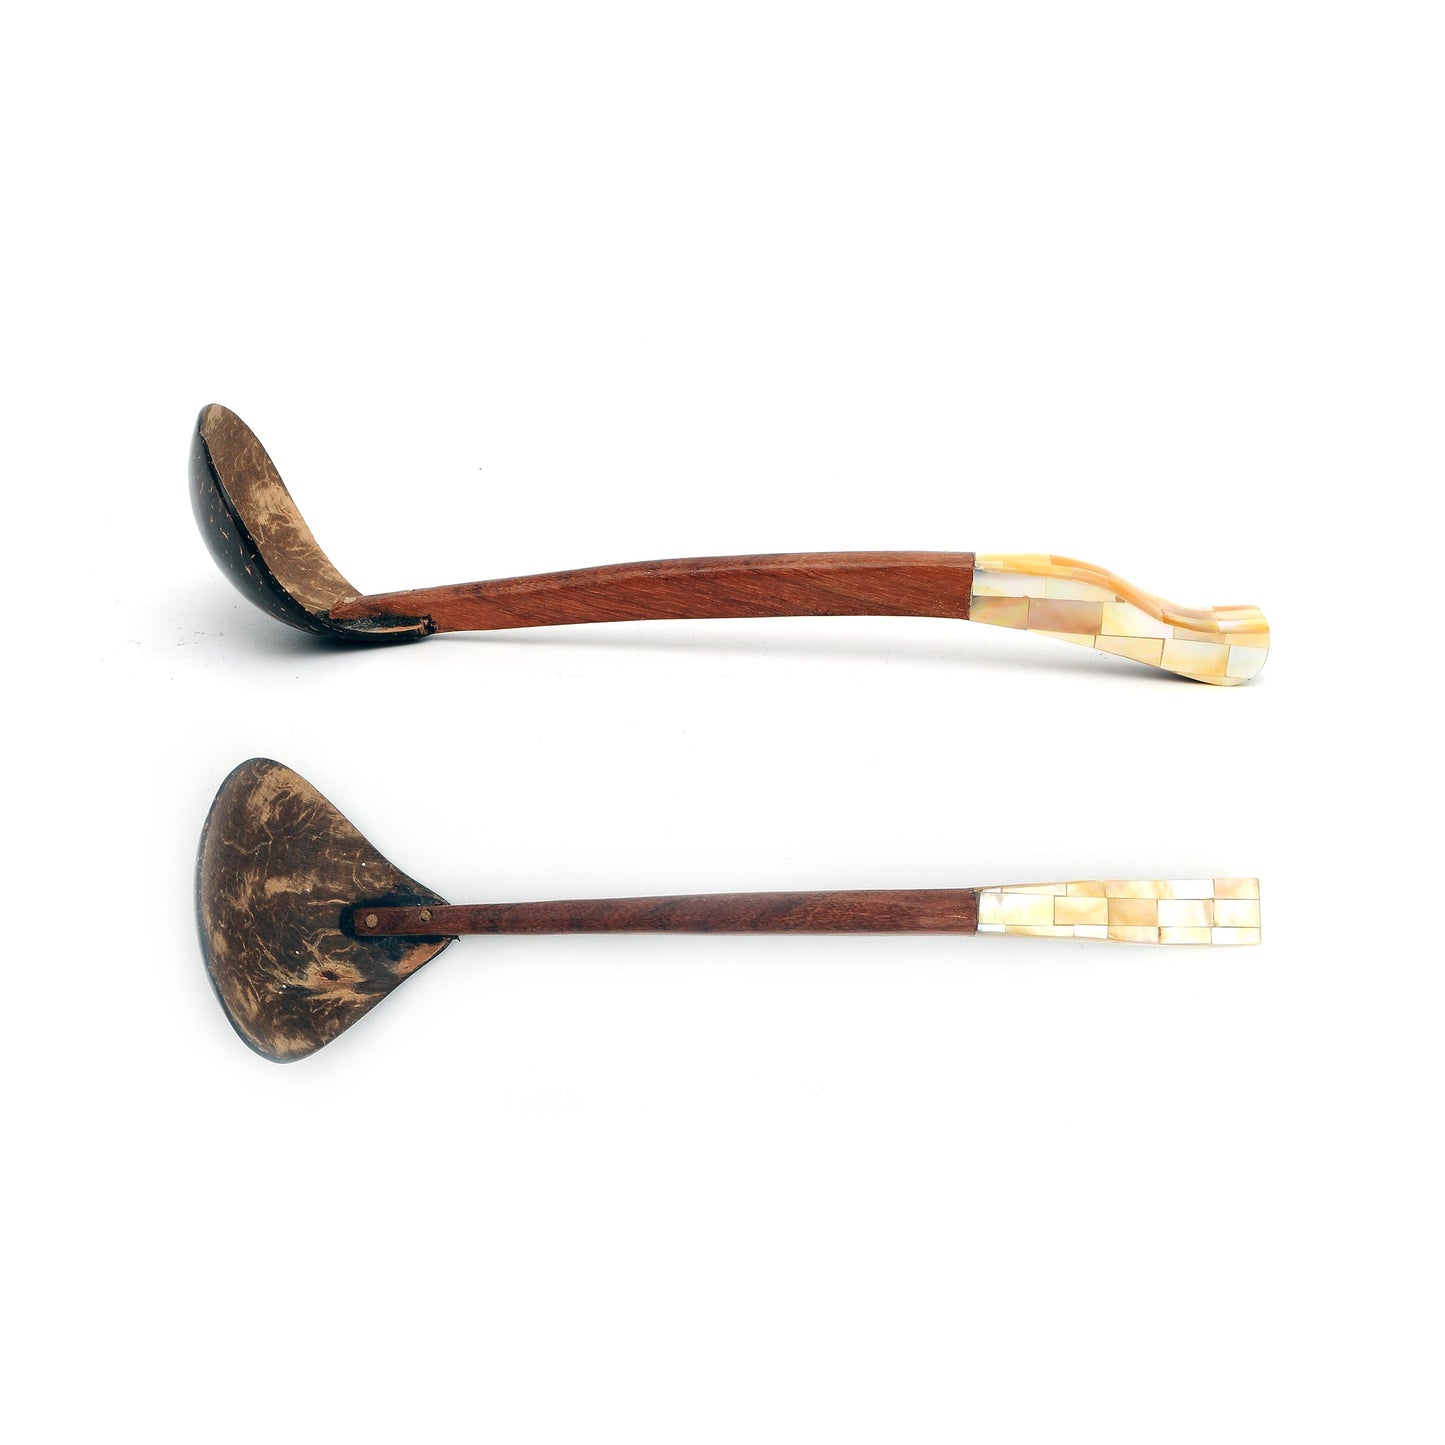 Myanmar Handmade Natural Wood Spoon Ladle With Mother of Pearl Seashell Inlay